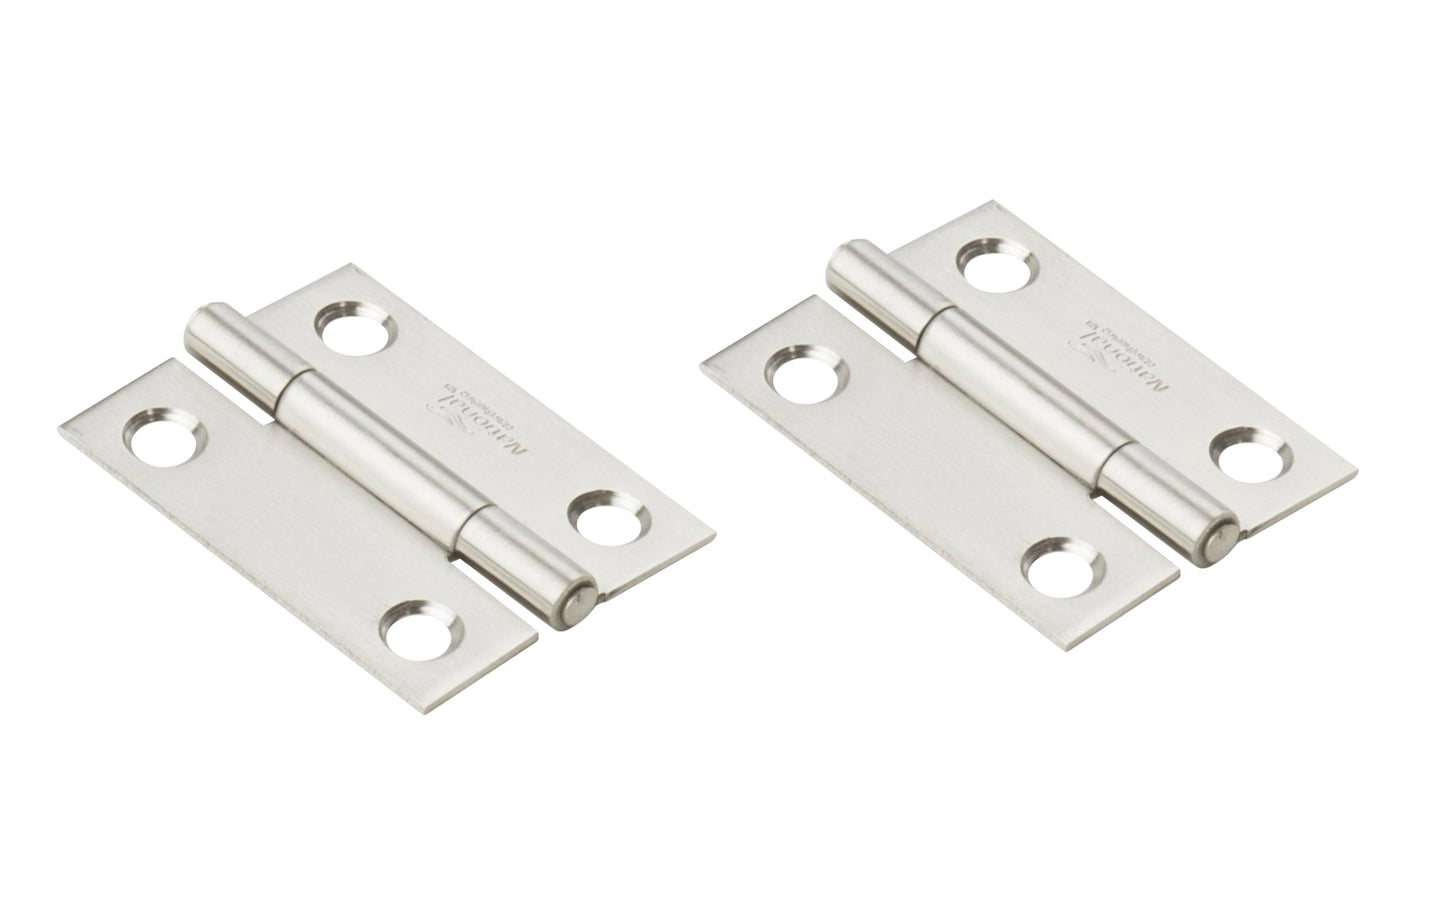 2" stainless narrow hinges designed for lightweight small doors, chests, cabinets, etc. Made of stainless steel material. Non-removable pin. The tight pin allows left or right hand applications. Sold as two hinges in pack.  National Hardware Model No. N348-987. 038613348981